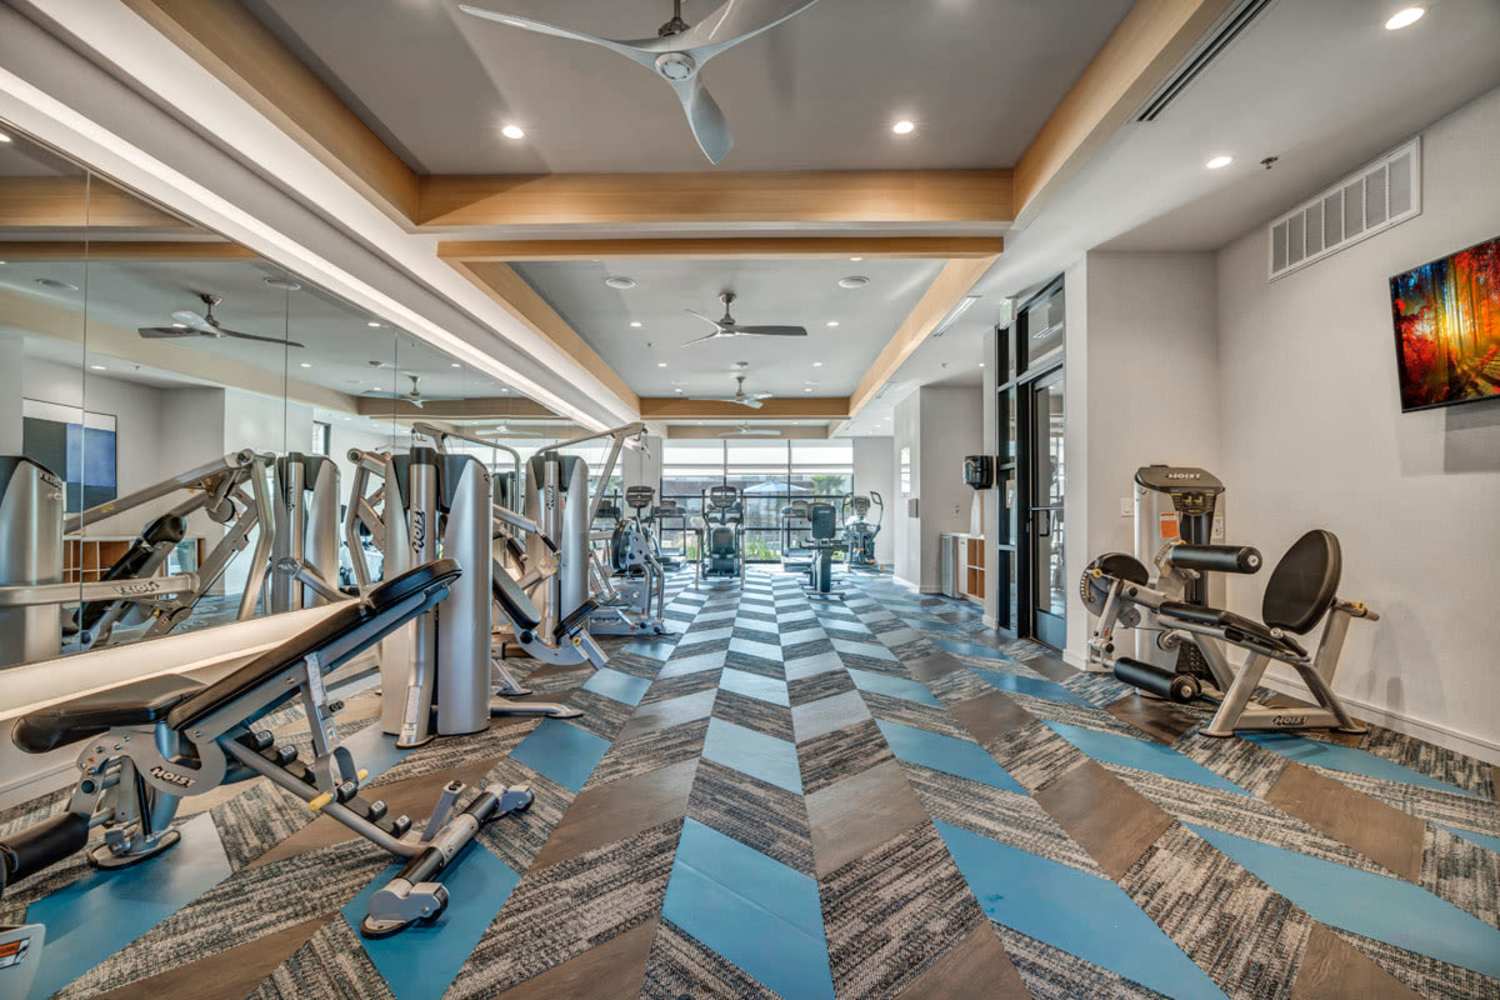 Fitness center at Chisholm at Tavolo Park in Fort Worth, Texas